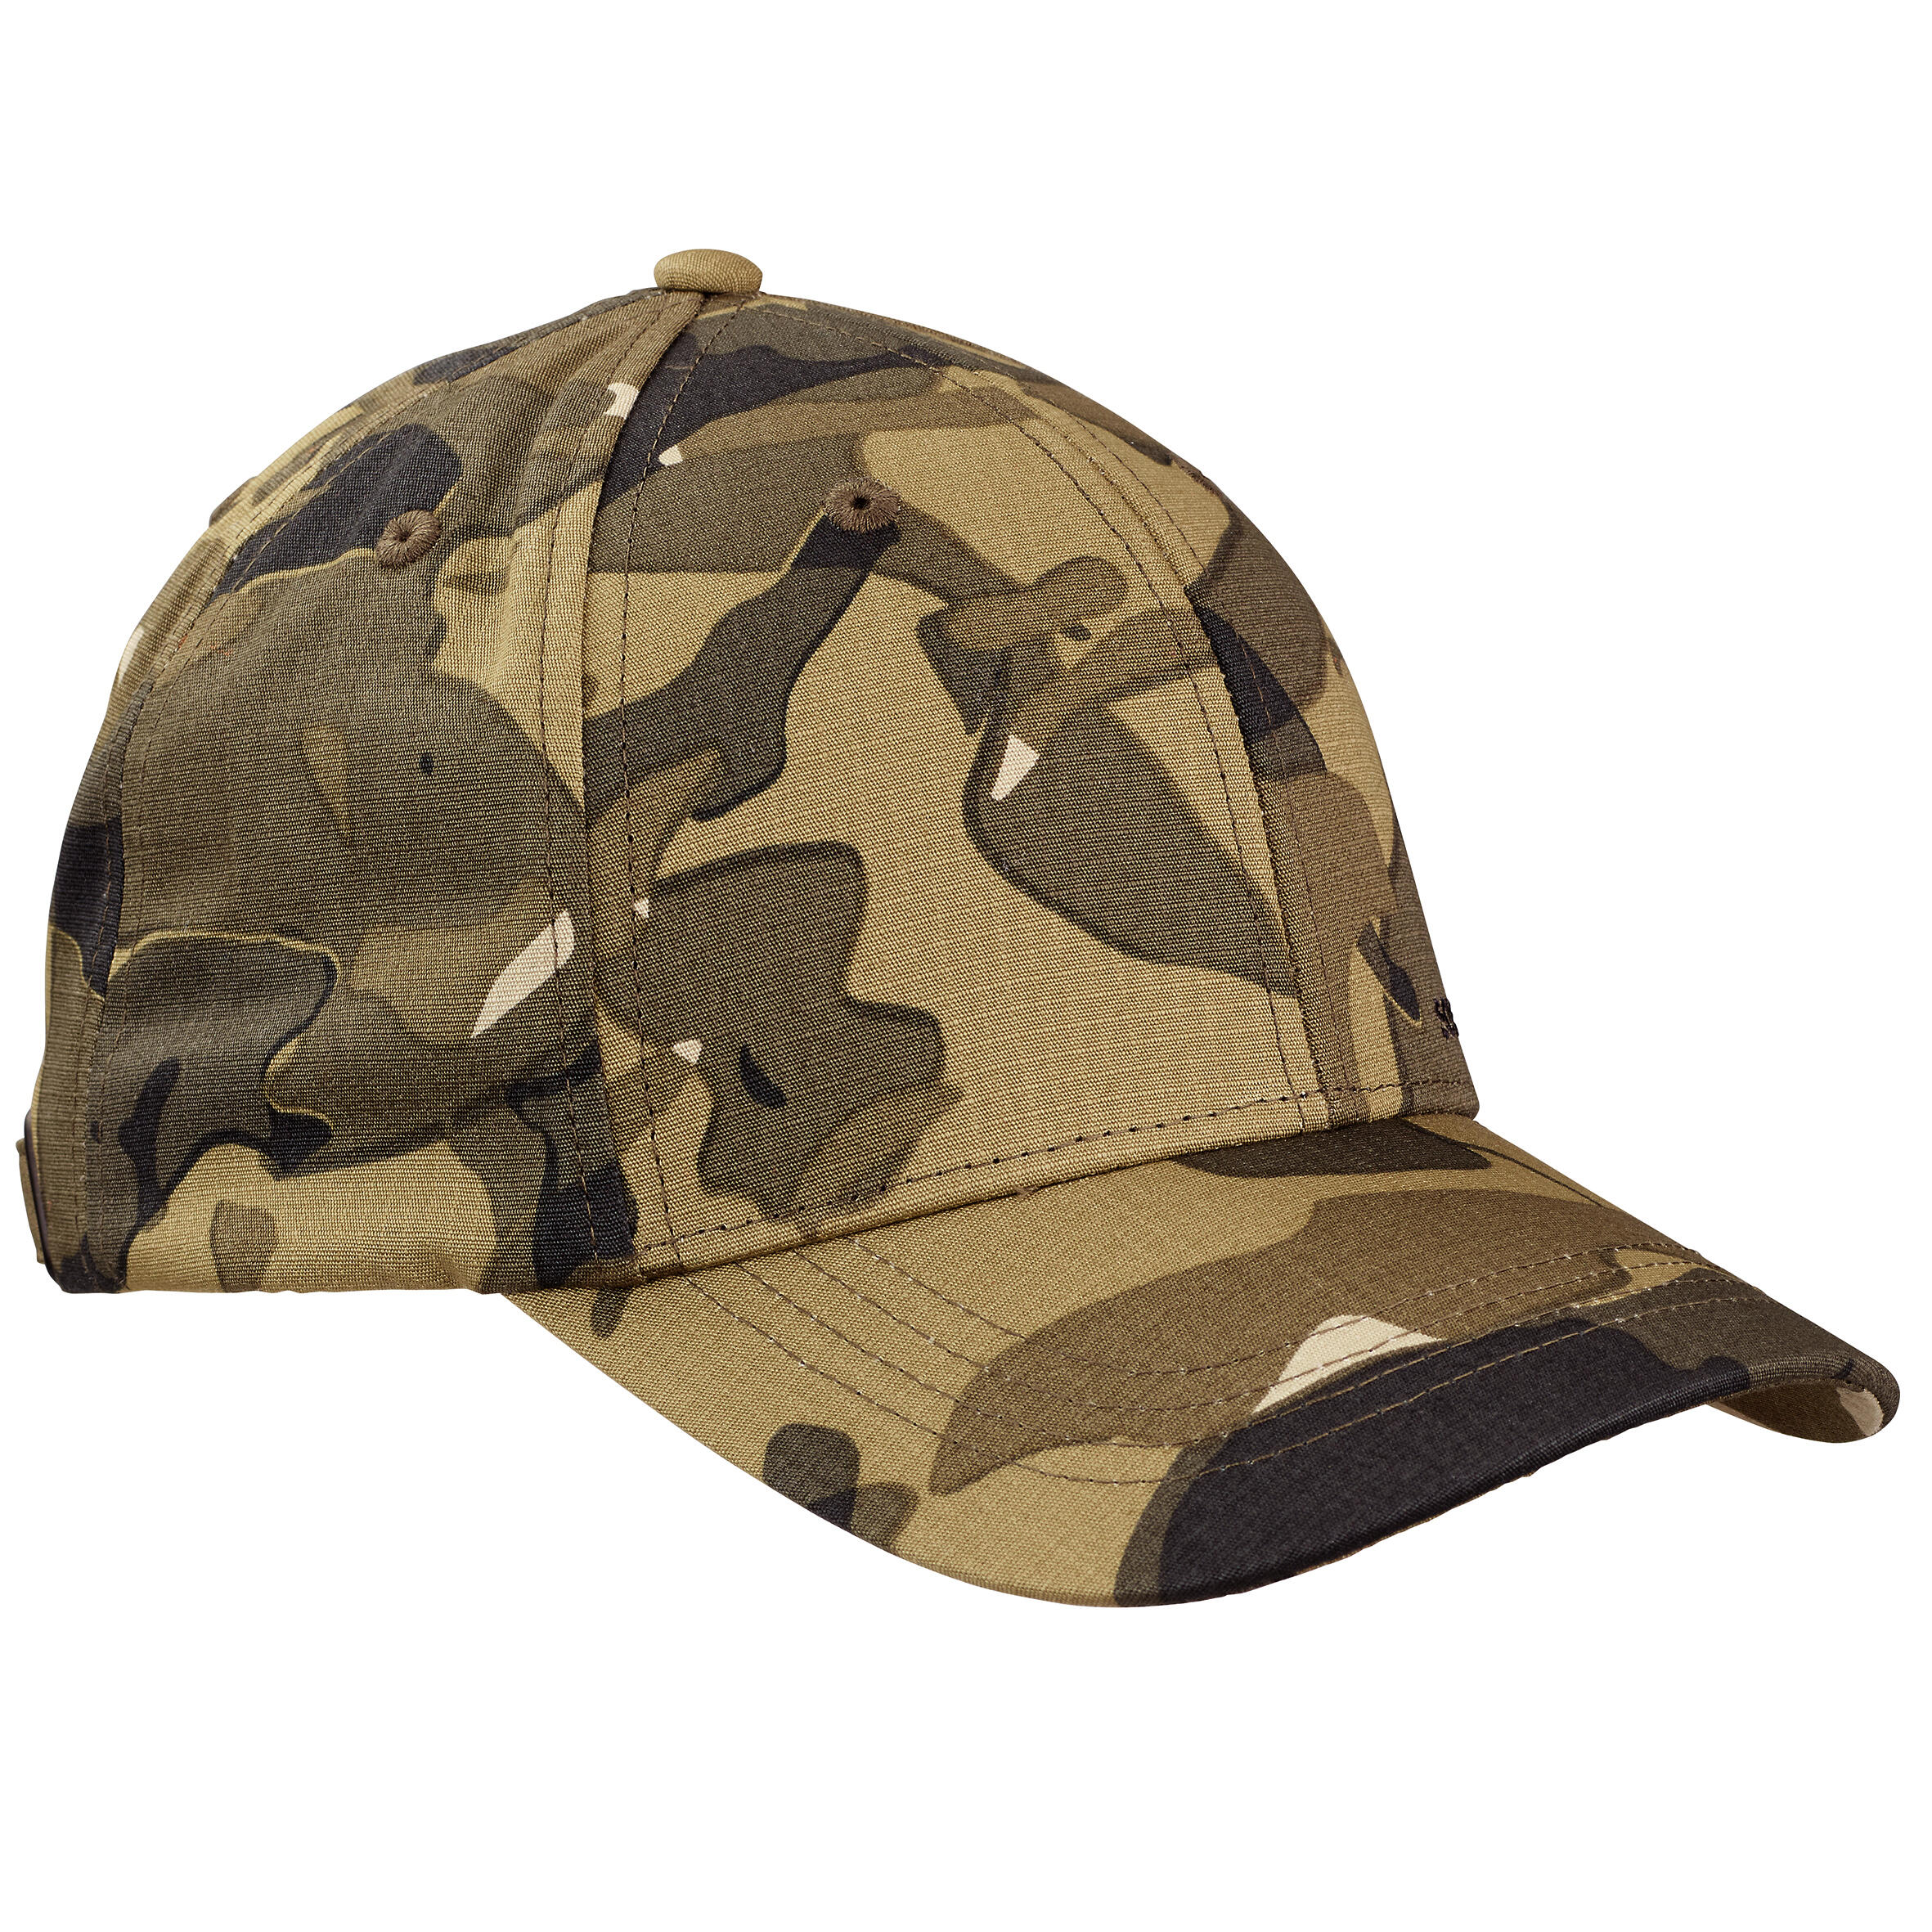 Country Sport Durable Cap 500 Woodland Camouflage Green 1/8